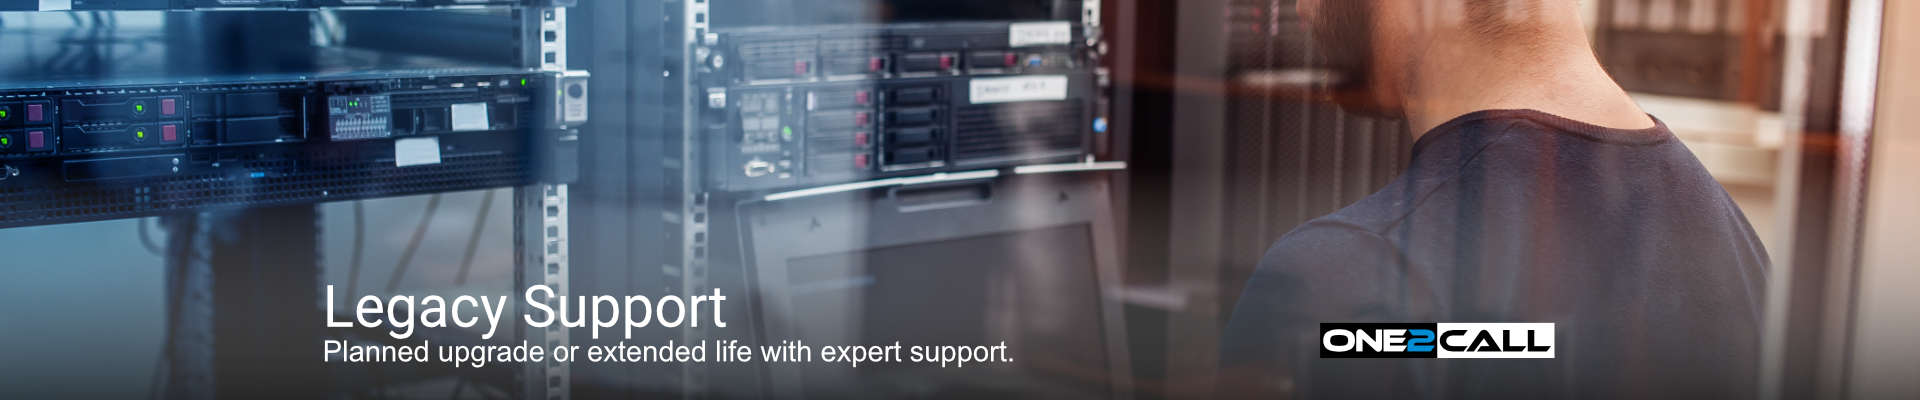 Legacy PBX Support - Planned upgrade or extended life with expert support.